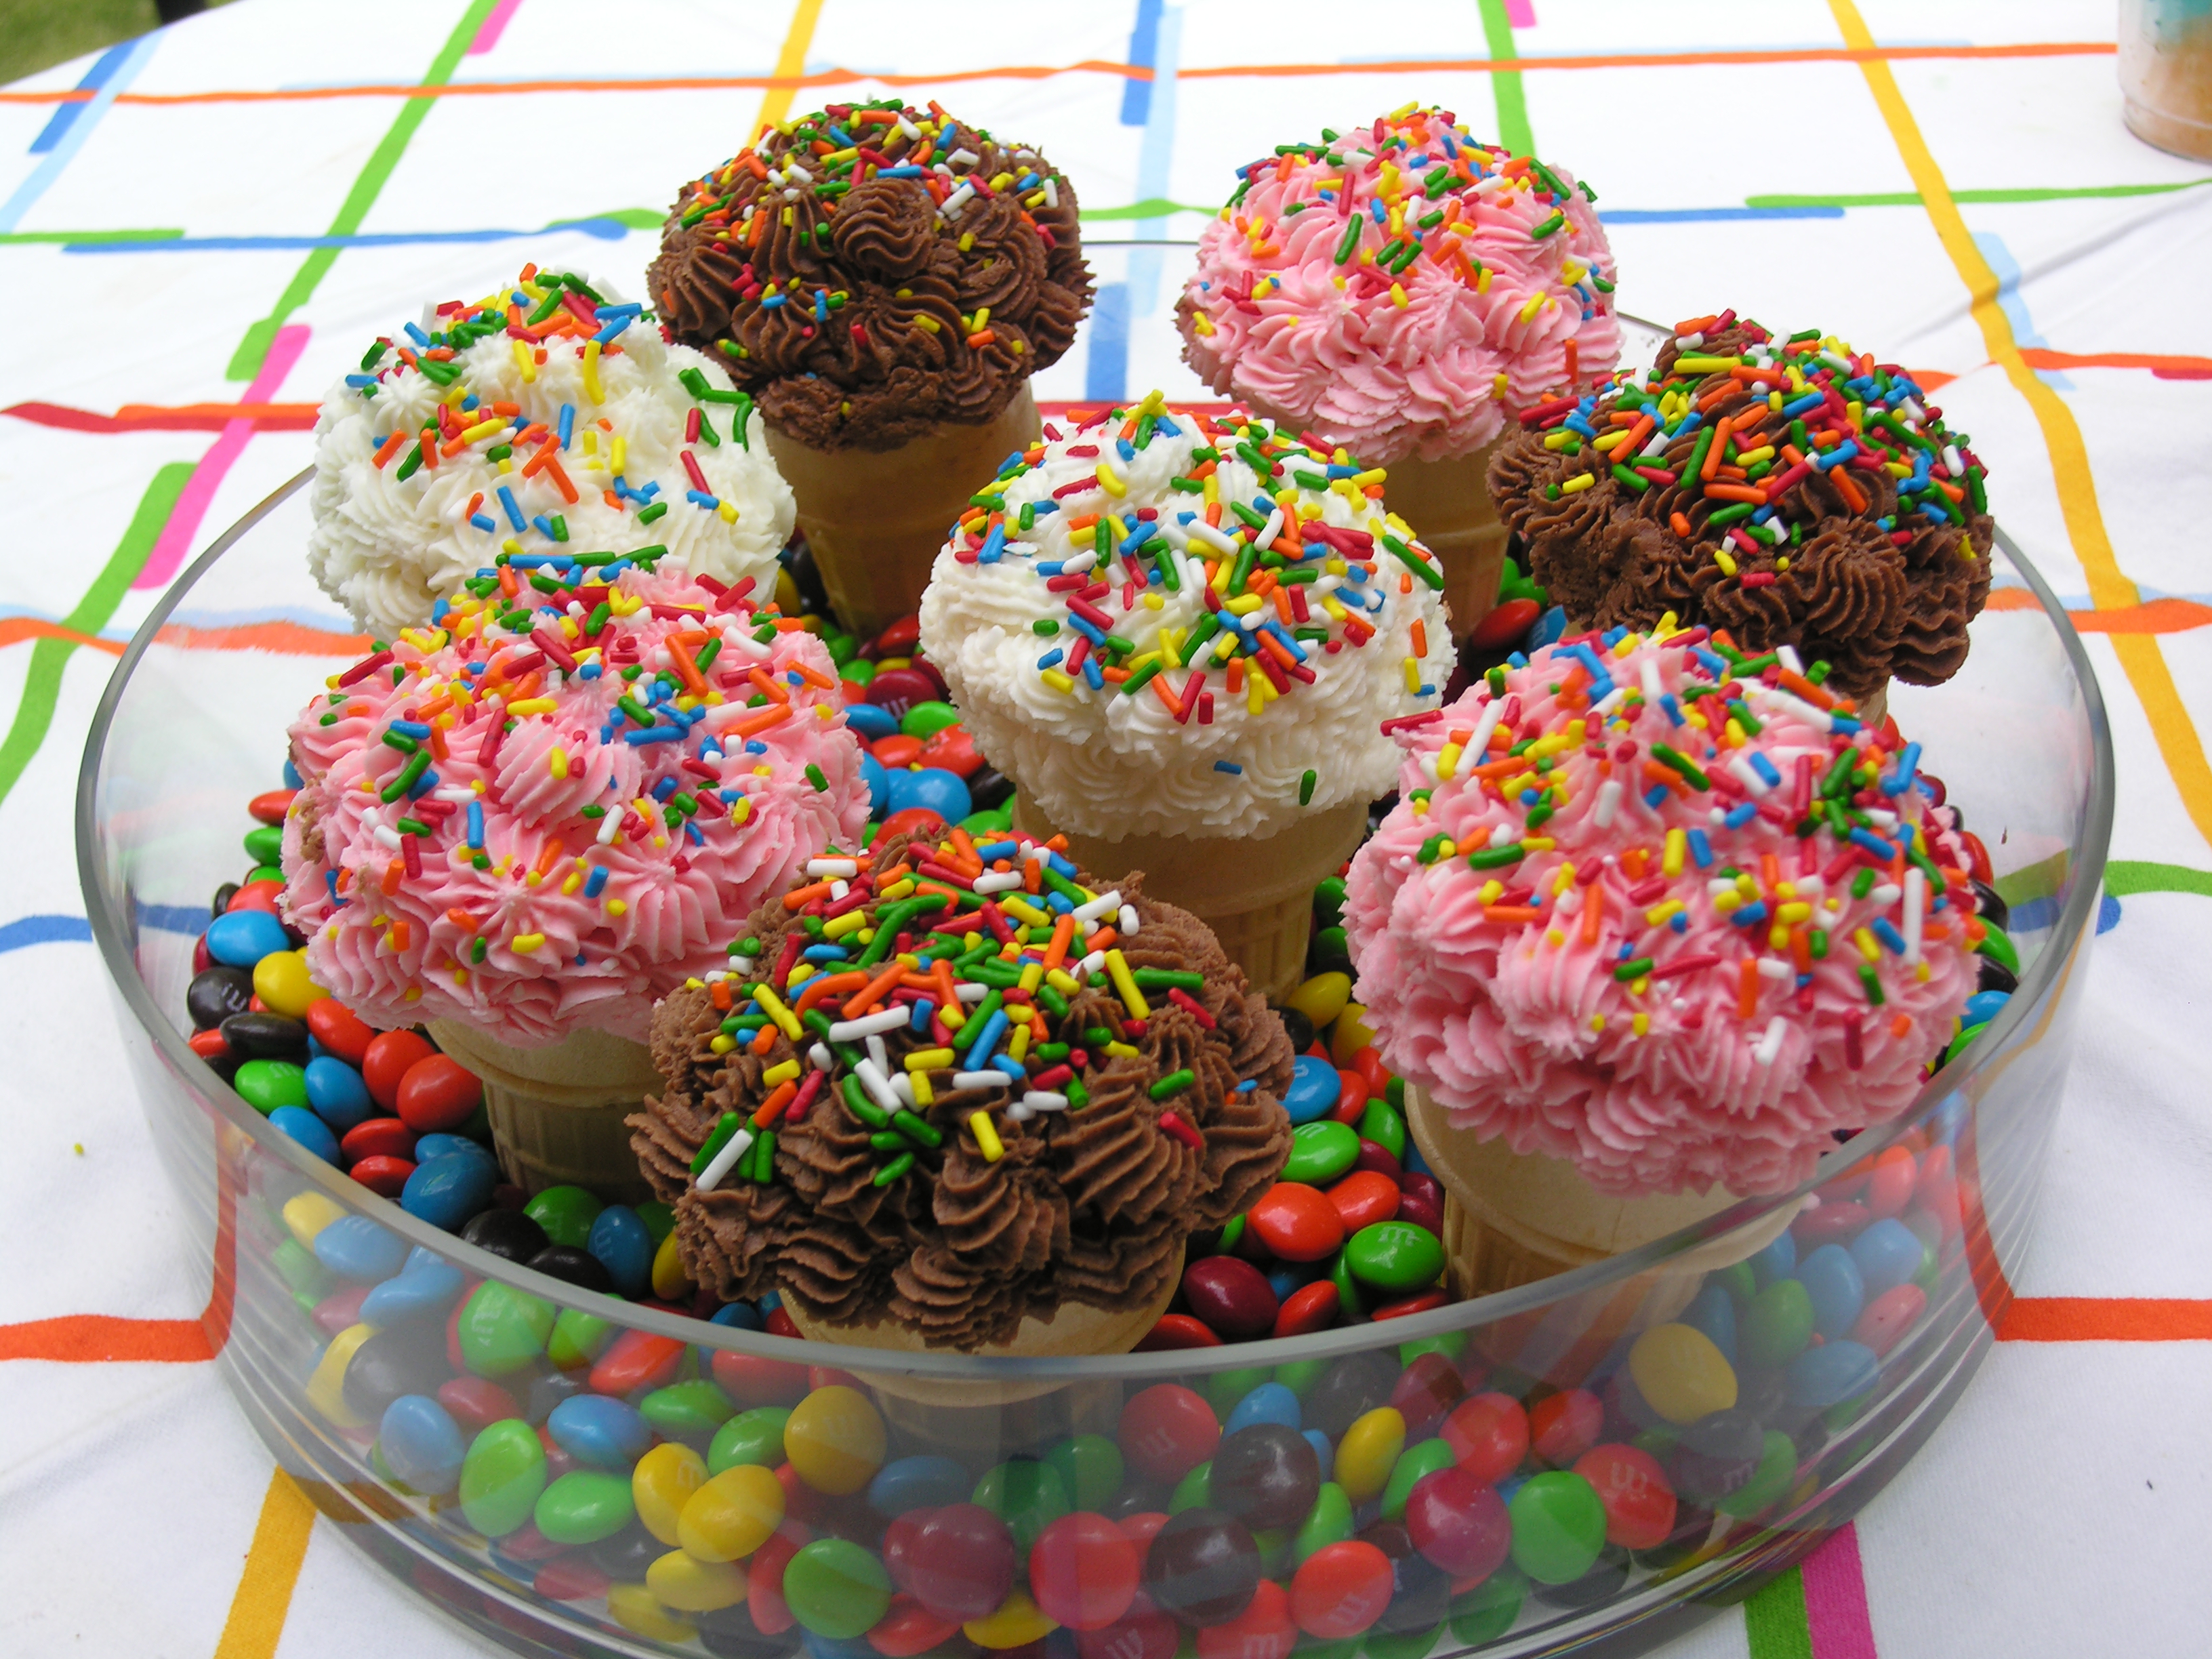 Serve colorful treats for children’s birthday parties